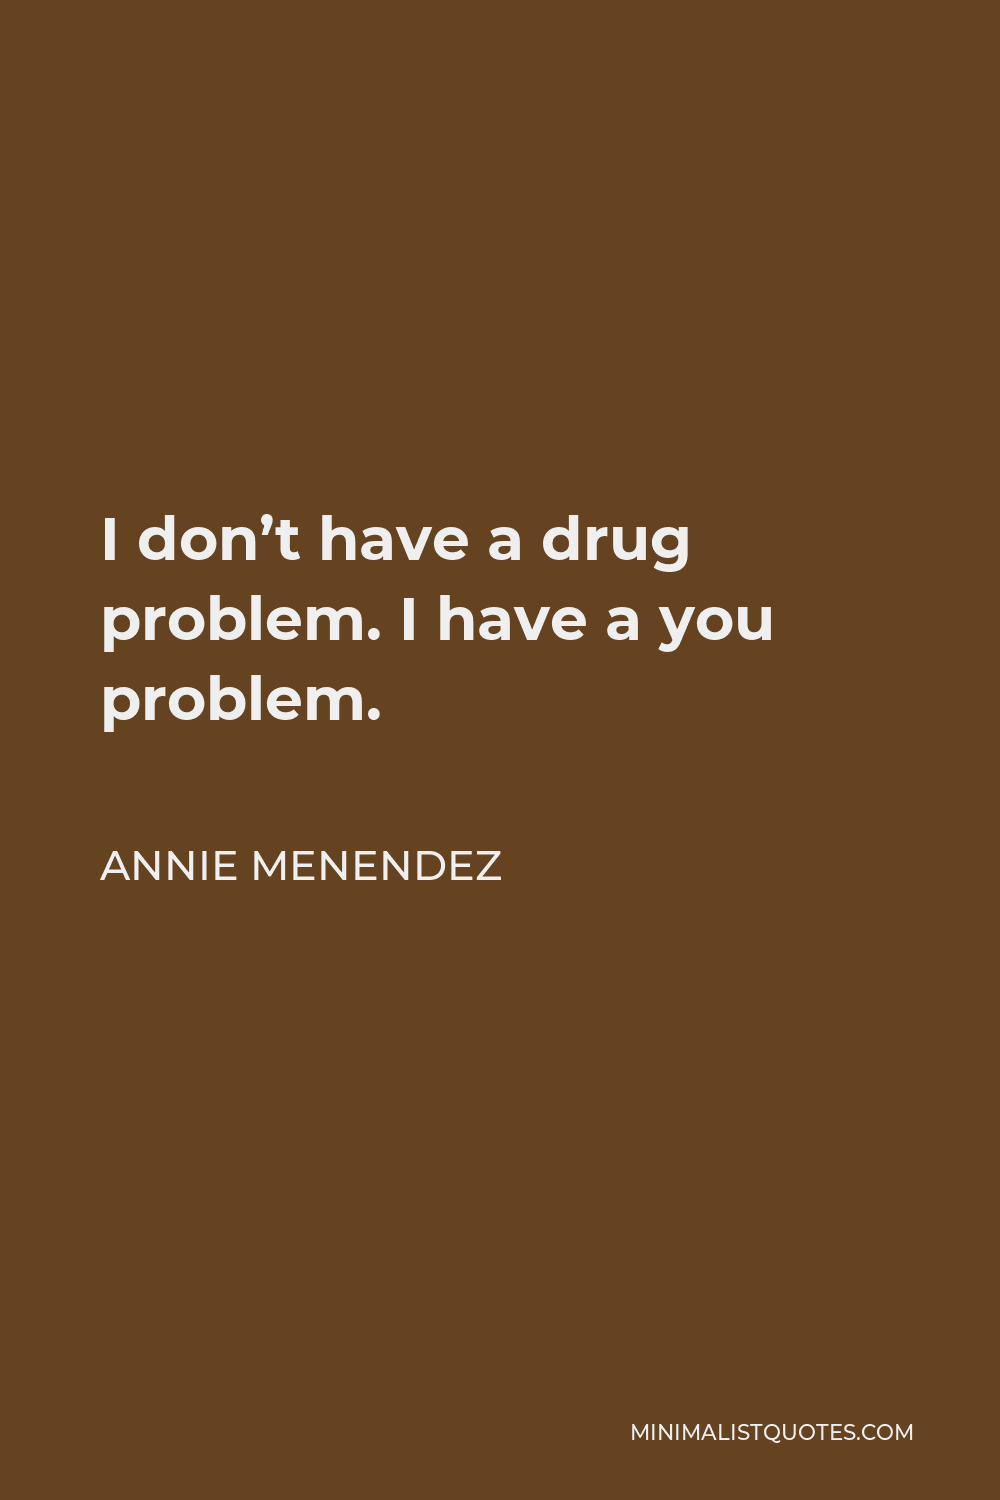 Annie Menendez Quote - I don’t have a drug problem. I have a you problem.